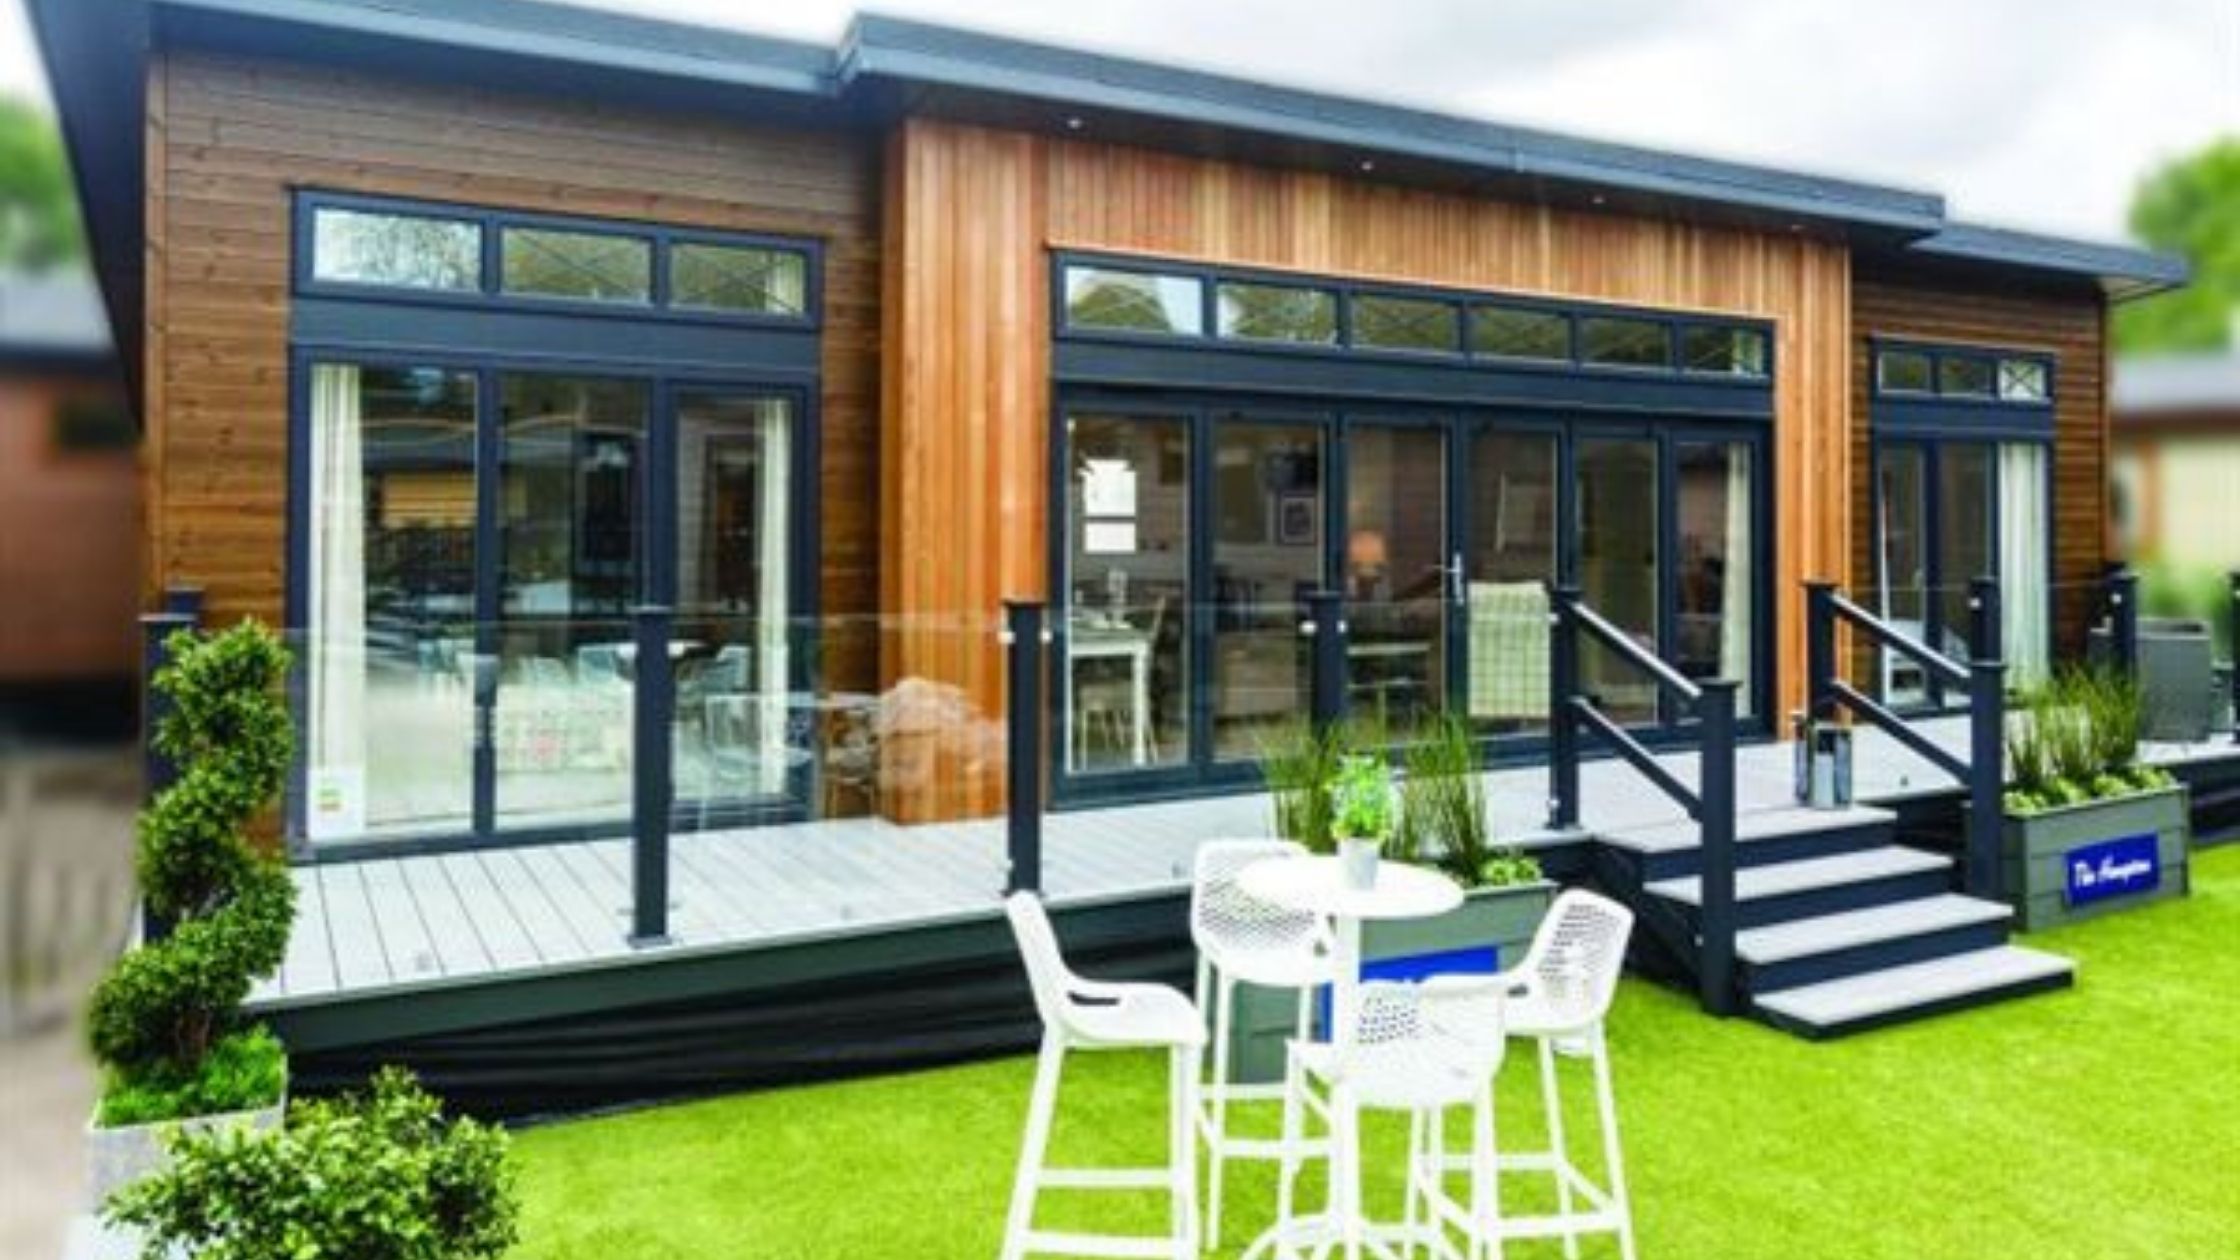 8 Reasons For The Rise In Popularity Of Park Home Living